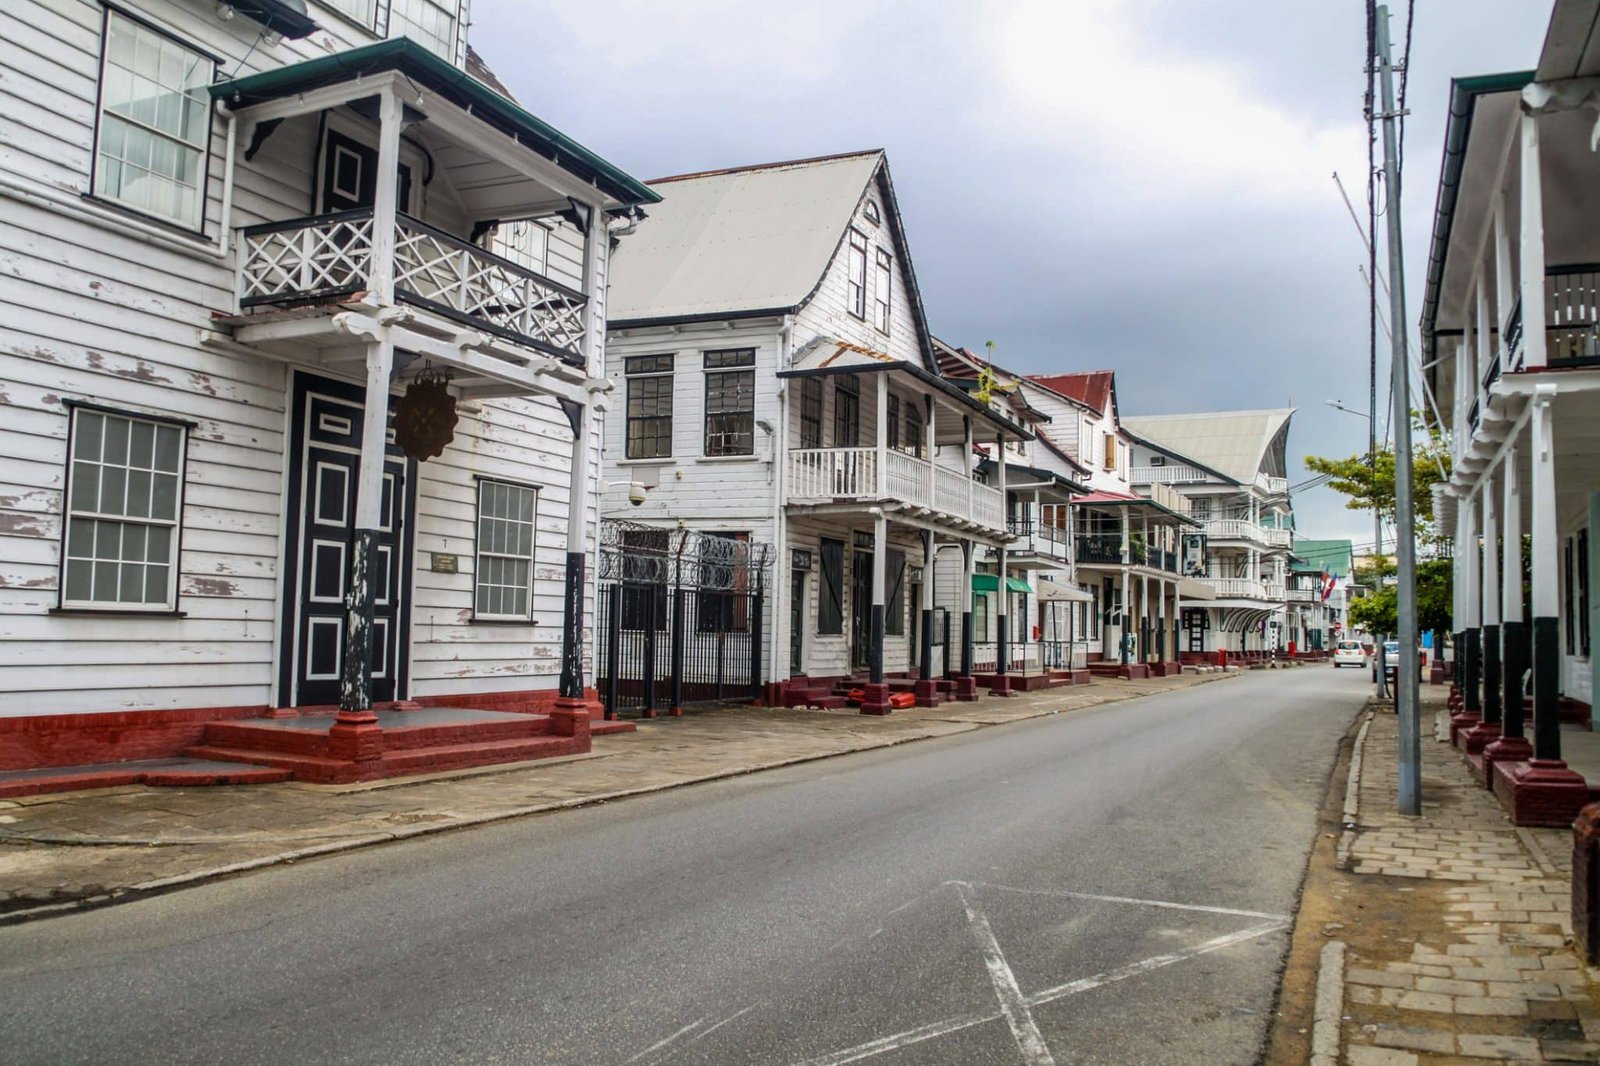 Street with old colonial buildings in Paramaribo, capital of Suriname.